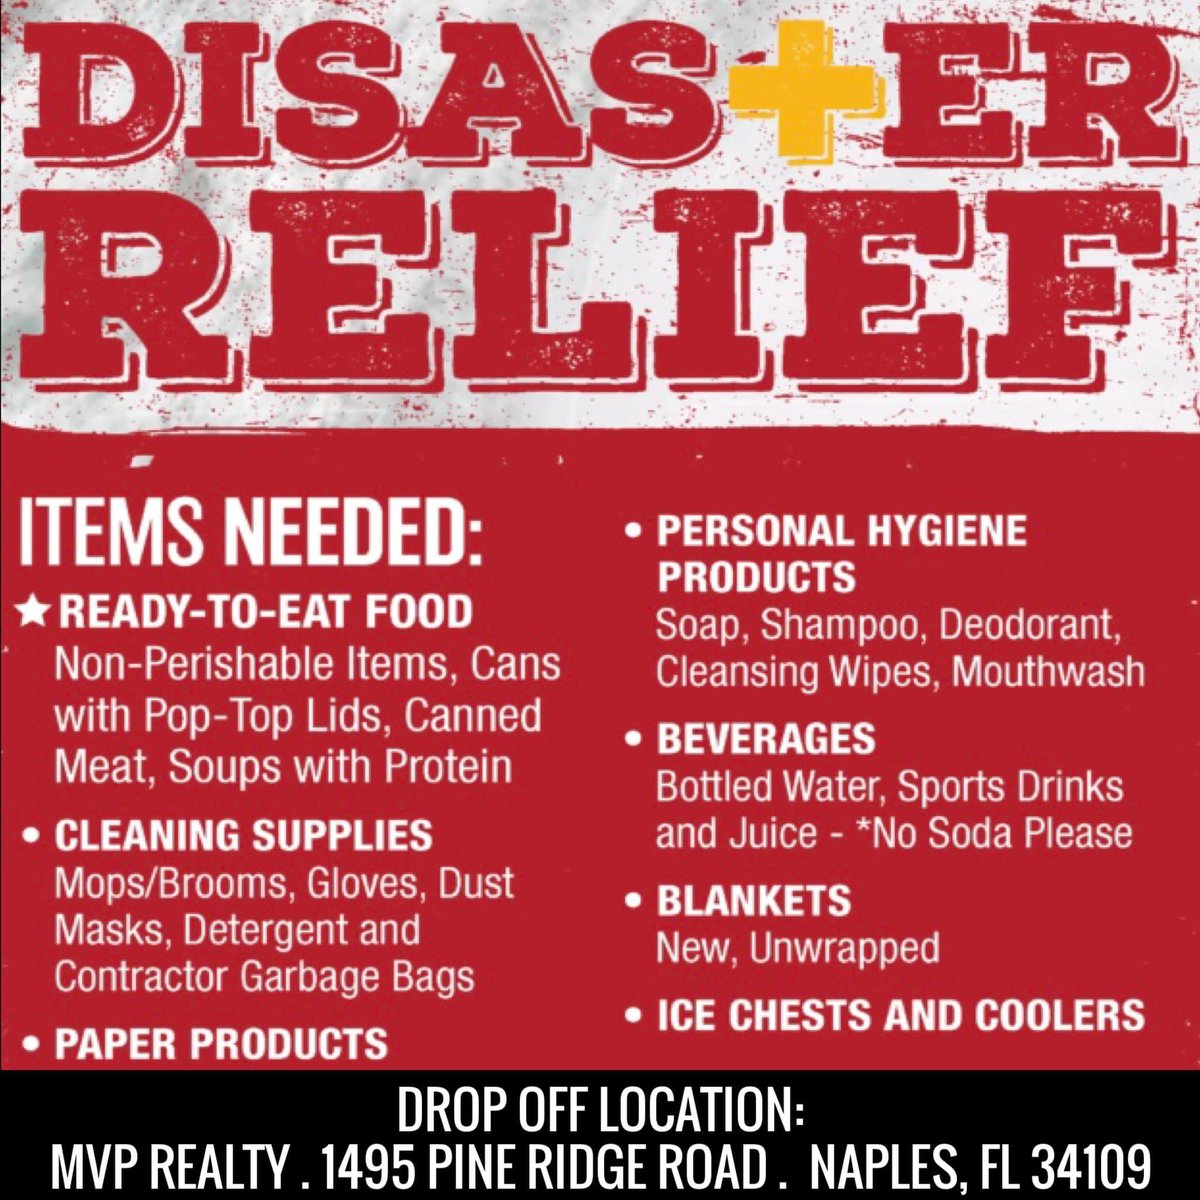 MVP Realty will be collecting supplies at our office today Wednesday October 5th from 9AM to 4PM at: MVP Realty 1495 Pine Ridge Road Naples, FL 34109 Today we will collect the supplies. Tomorrow we distribute into the hardest hit areas. Thank you for your support!❤️🙏🏻#mvpcares